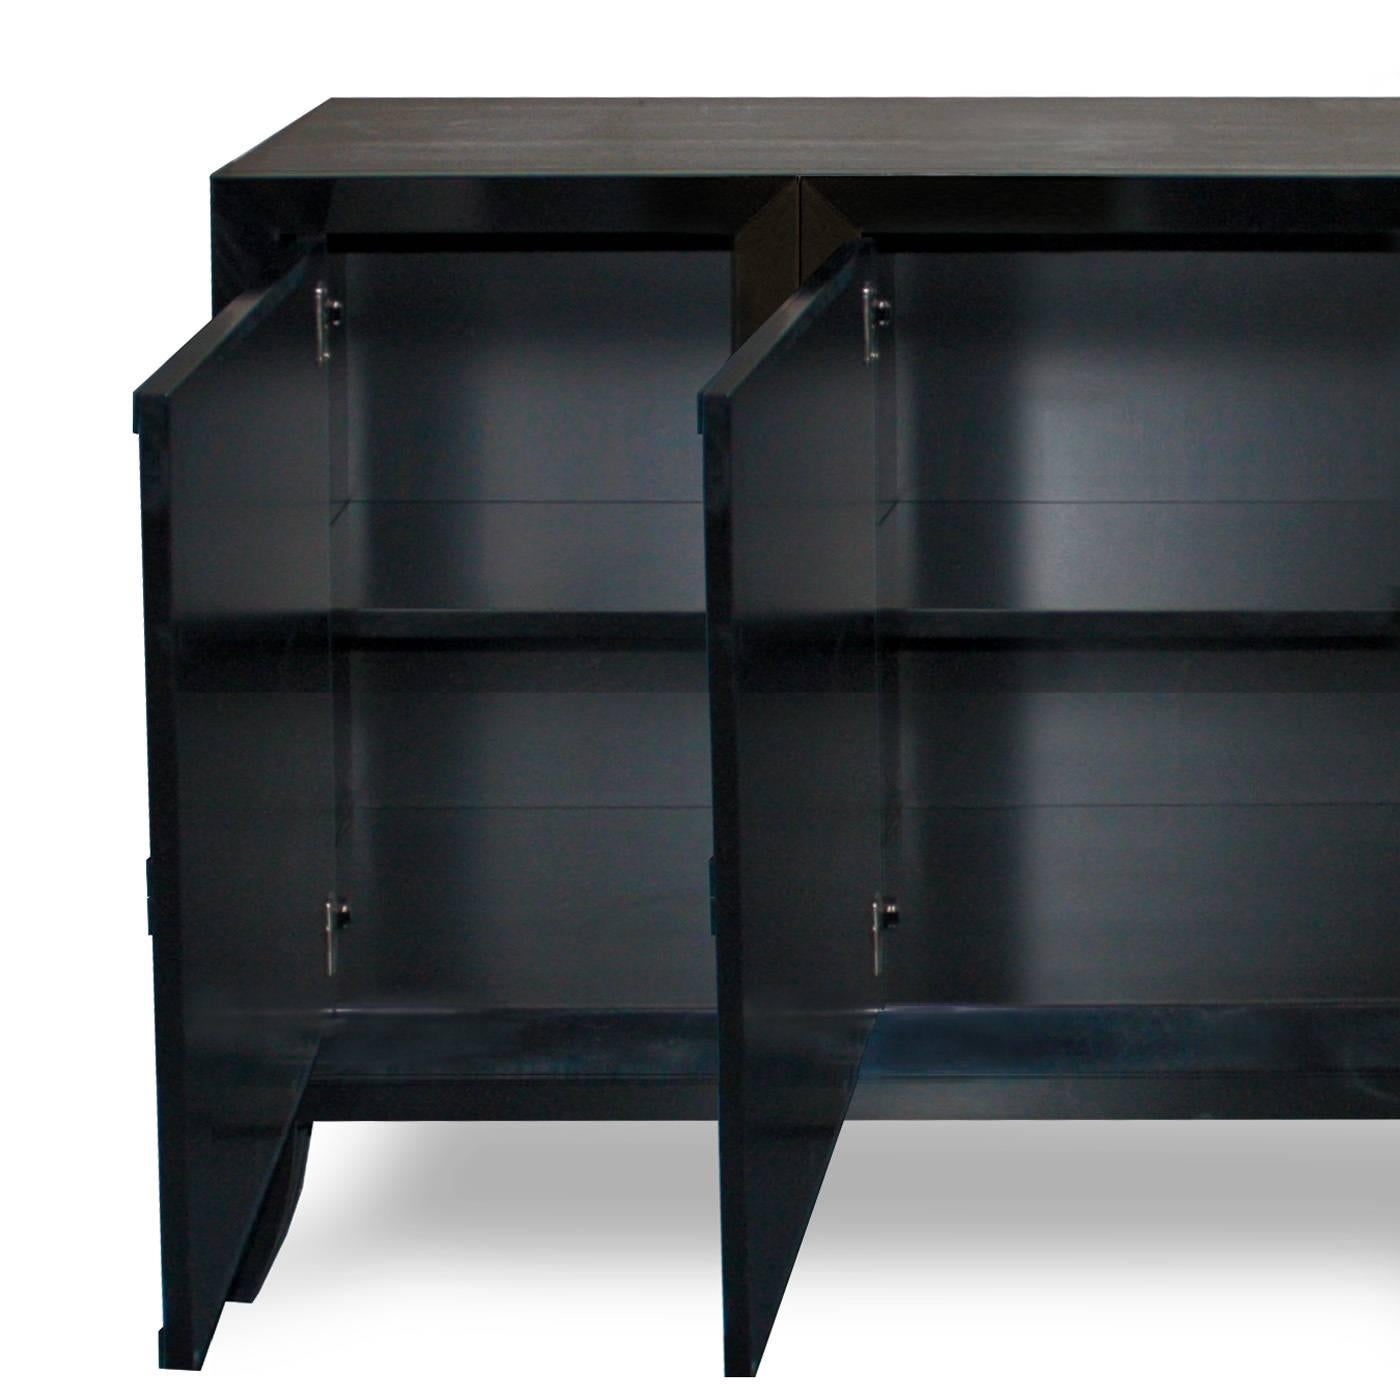 This four-door sideboard, is beautifully crafted by the finest Italian artisans and is finished in a hard, super sleek black gloss lacquer. The black and white finish and the wooden rhomboid-shaped handle add drama and sophistication.